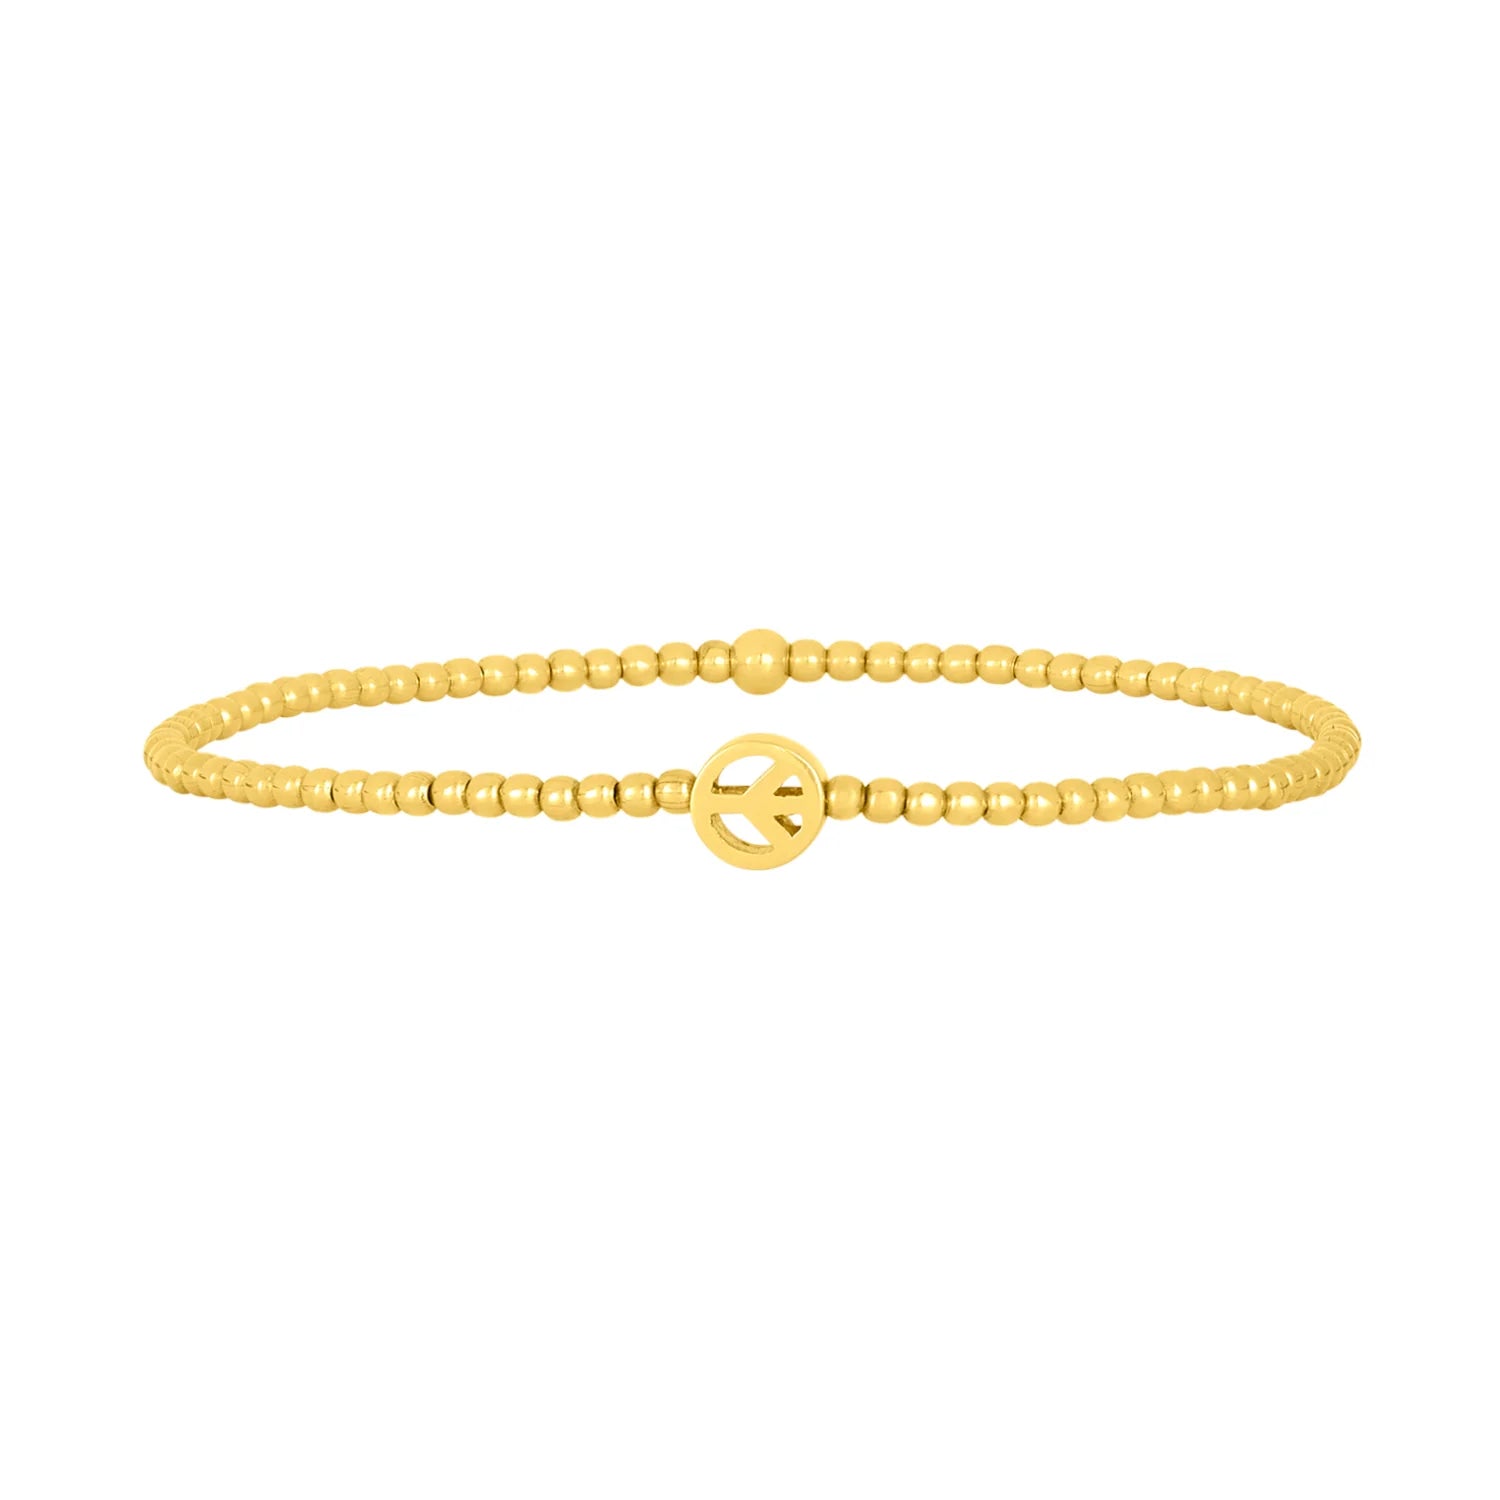 2MM SIGNATURE BRACELET WITH 14K PEACE SIGN BEAD